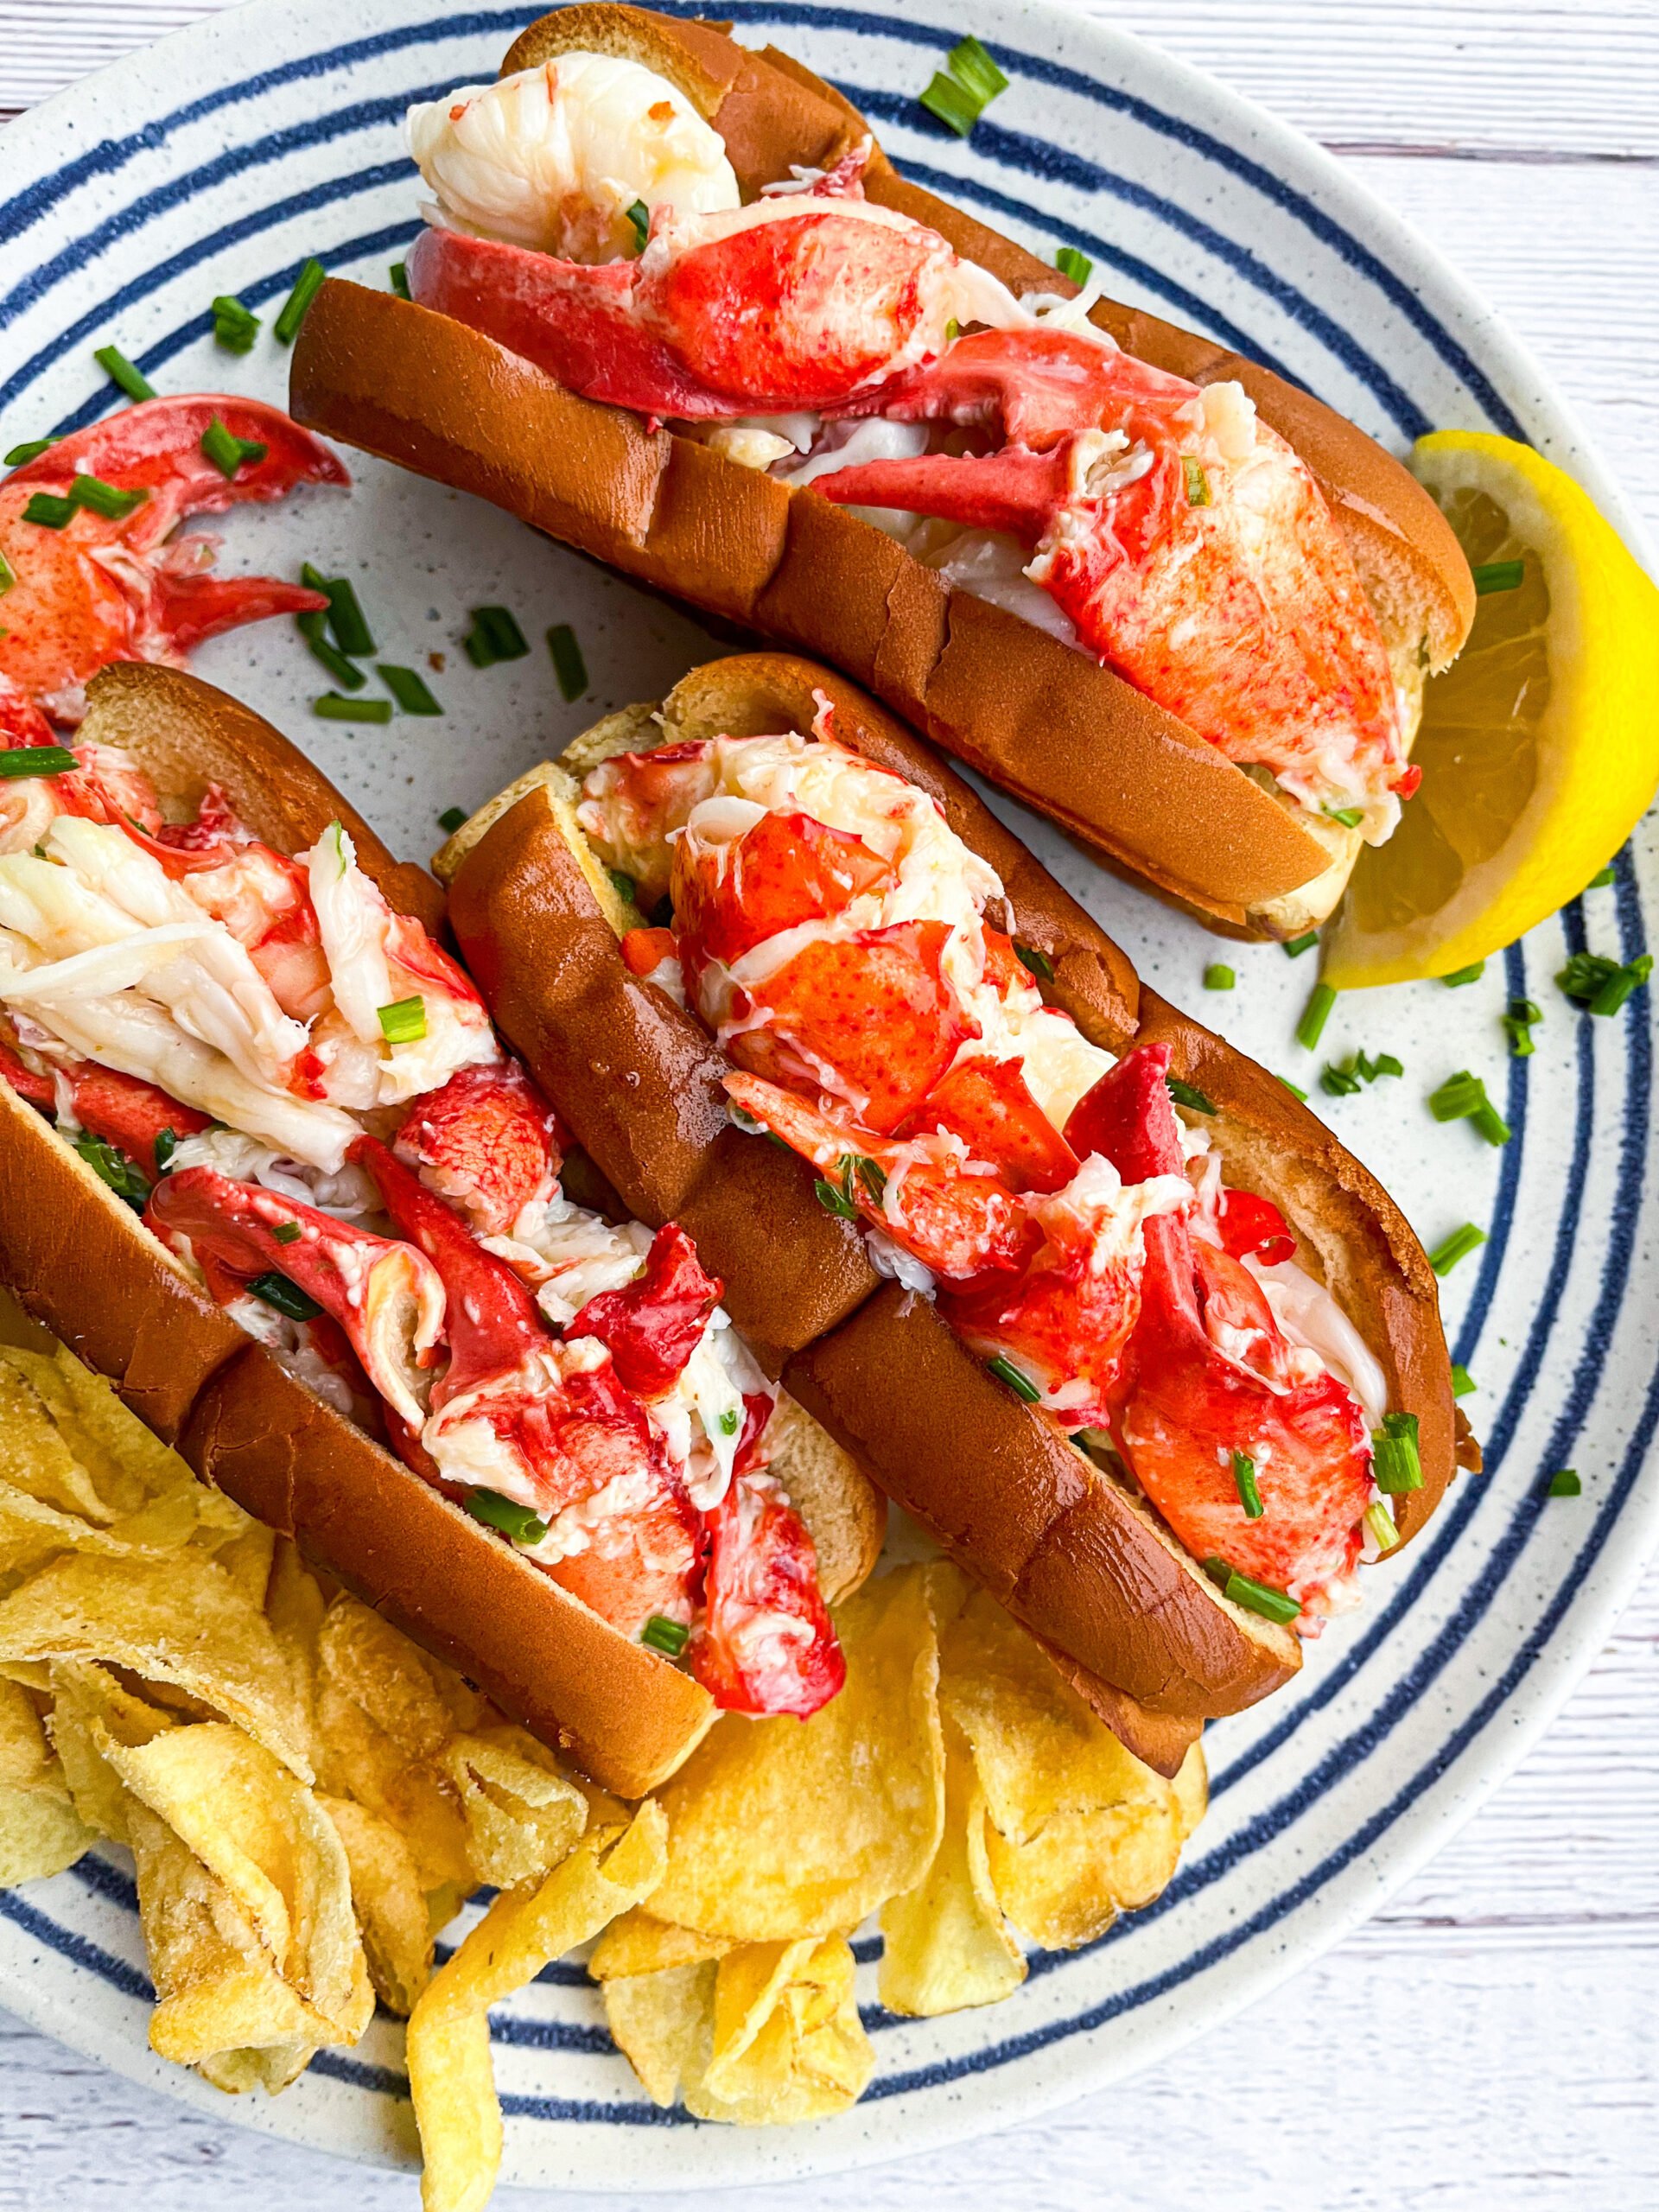 Connecticut Buttered Lobster Roll Recipe